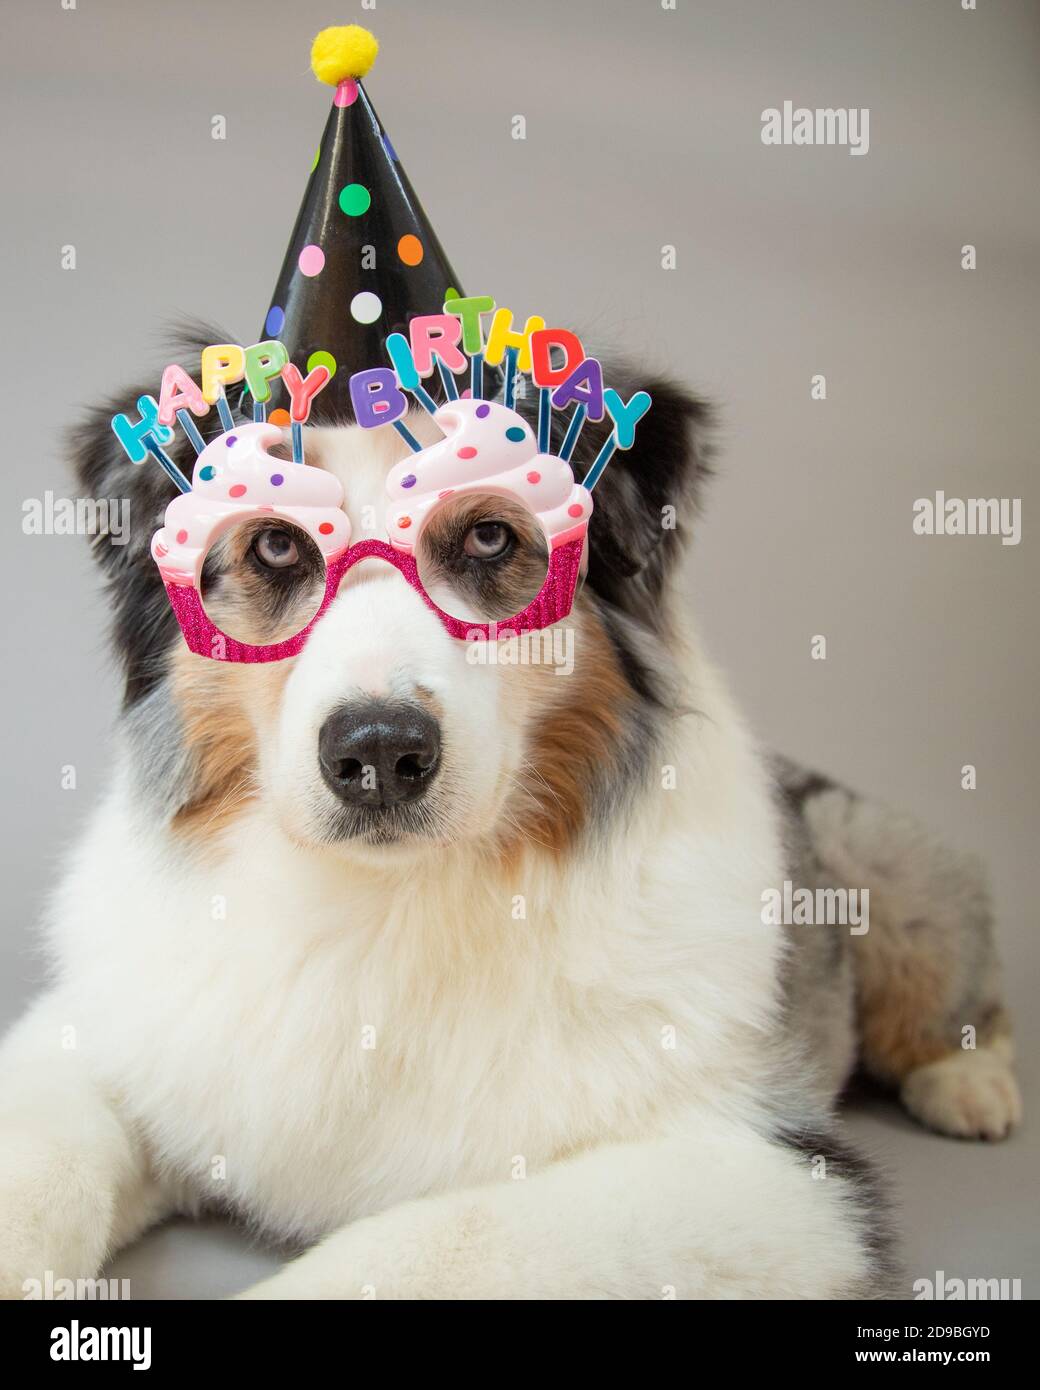 Portrait of an Australian shepherd wearing a party hat and novelty glasses Stock Photo